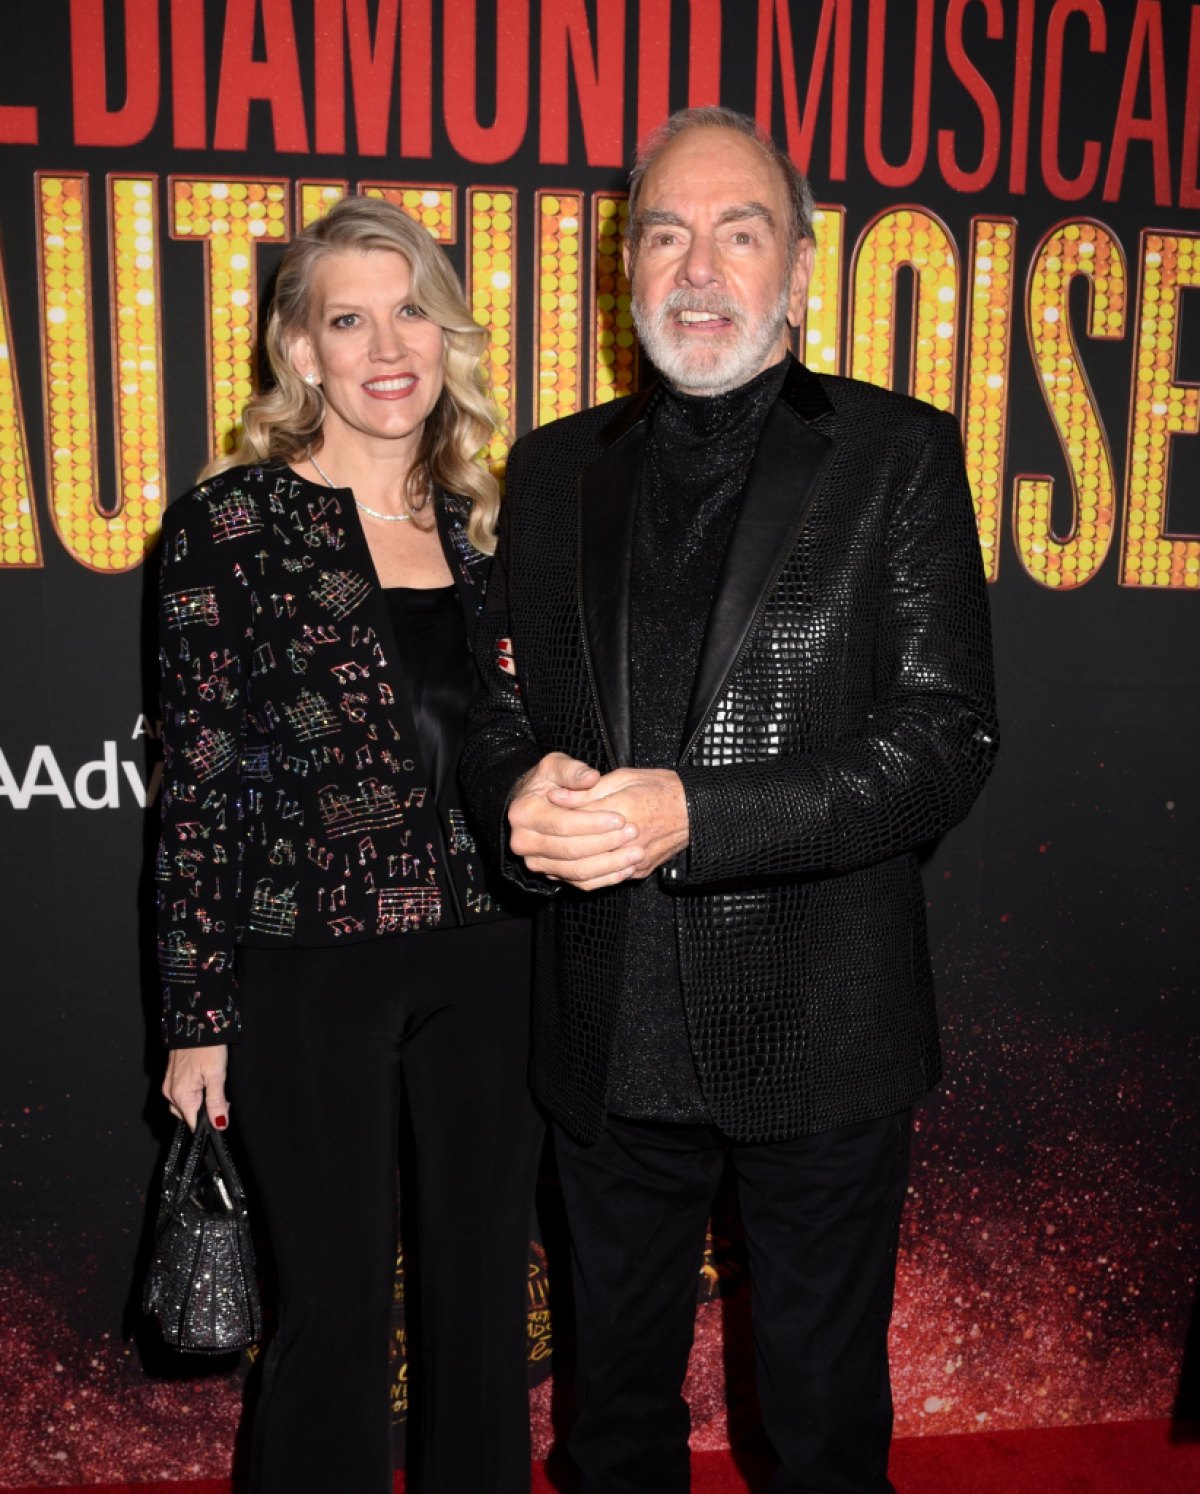 Neil Diamond opens up about accepting his Parkinson's diagnosis